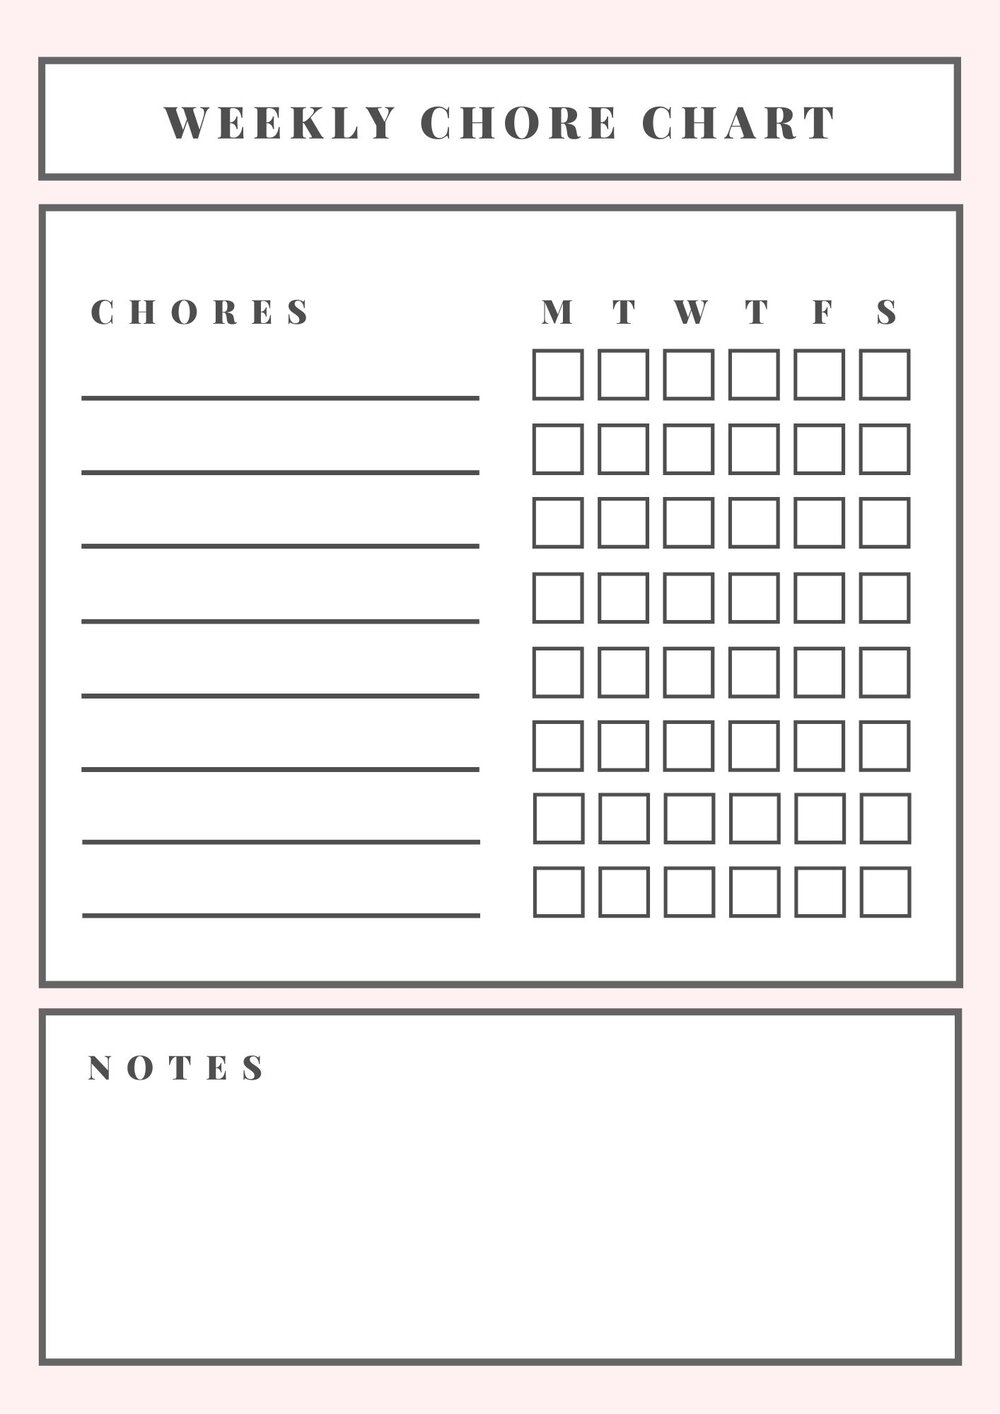 Pink and Gray Chore Chart Planner.jpg